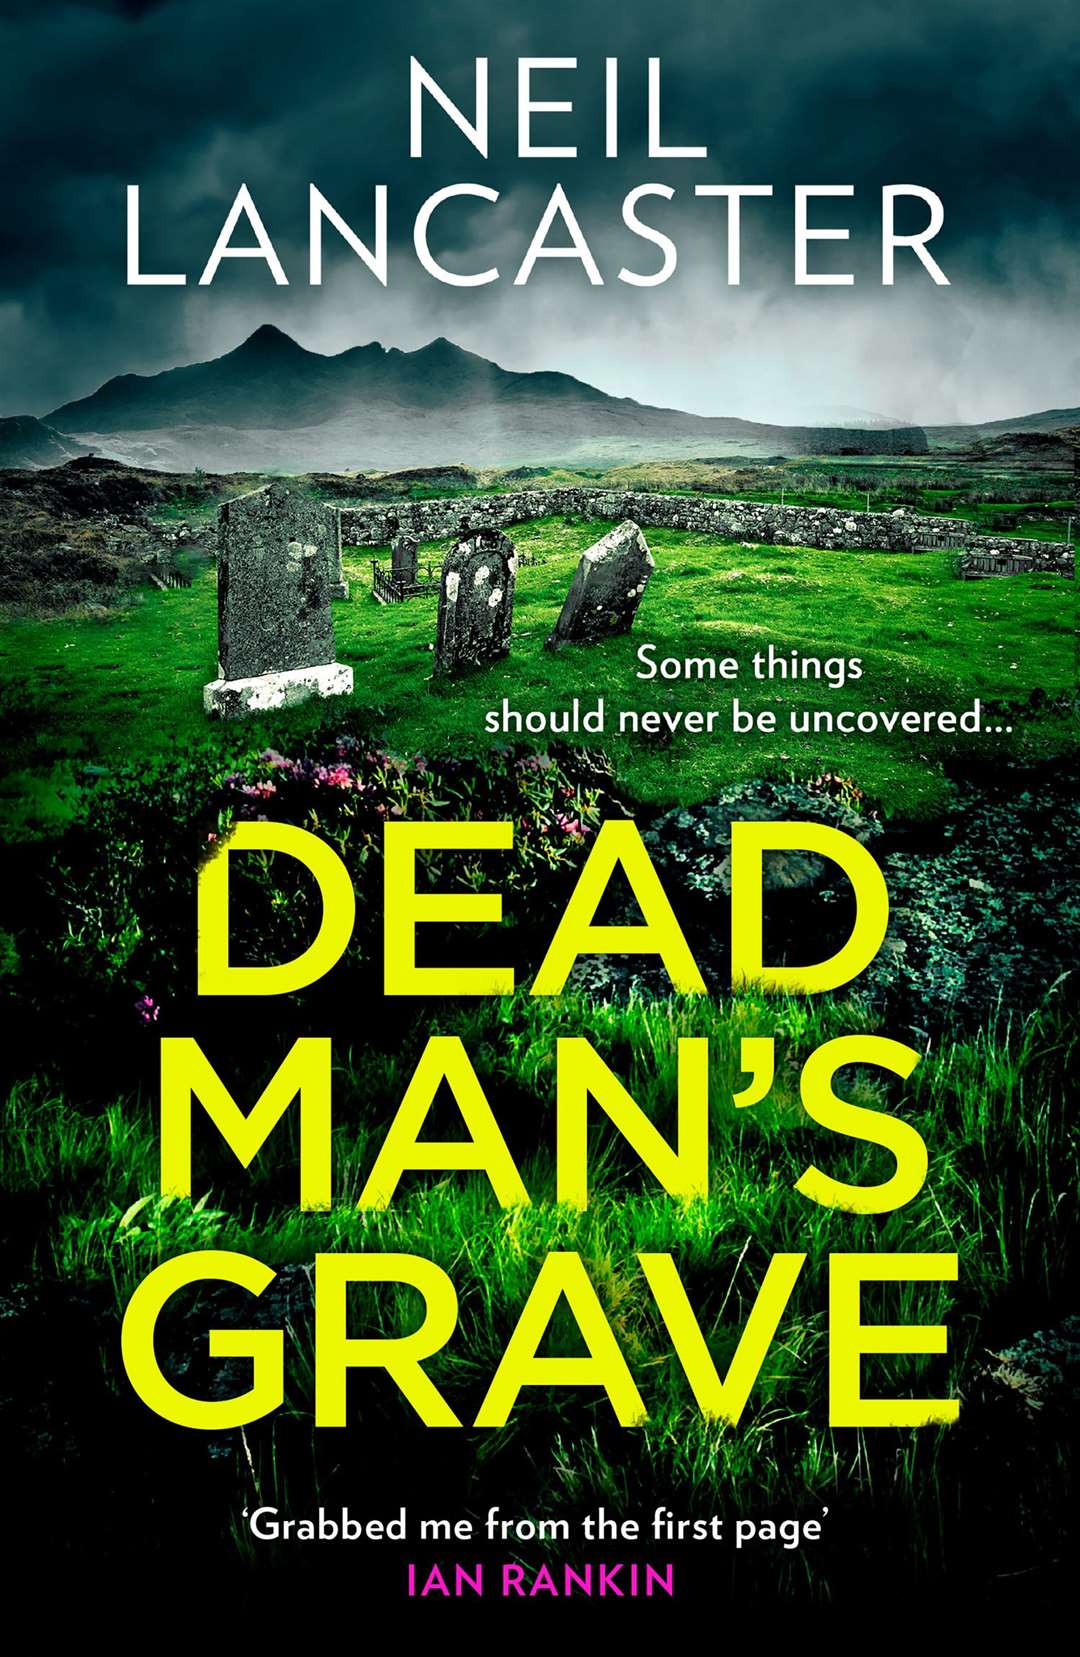 New book was inspired by the story of an unusual grave stone.